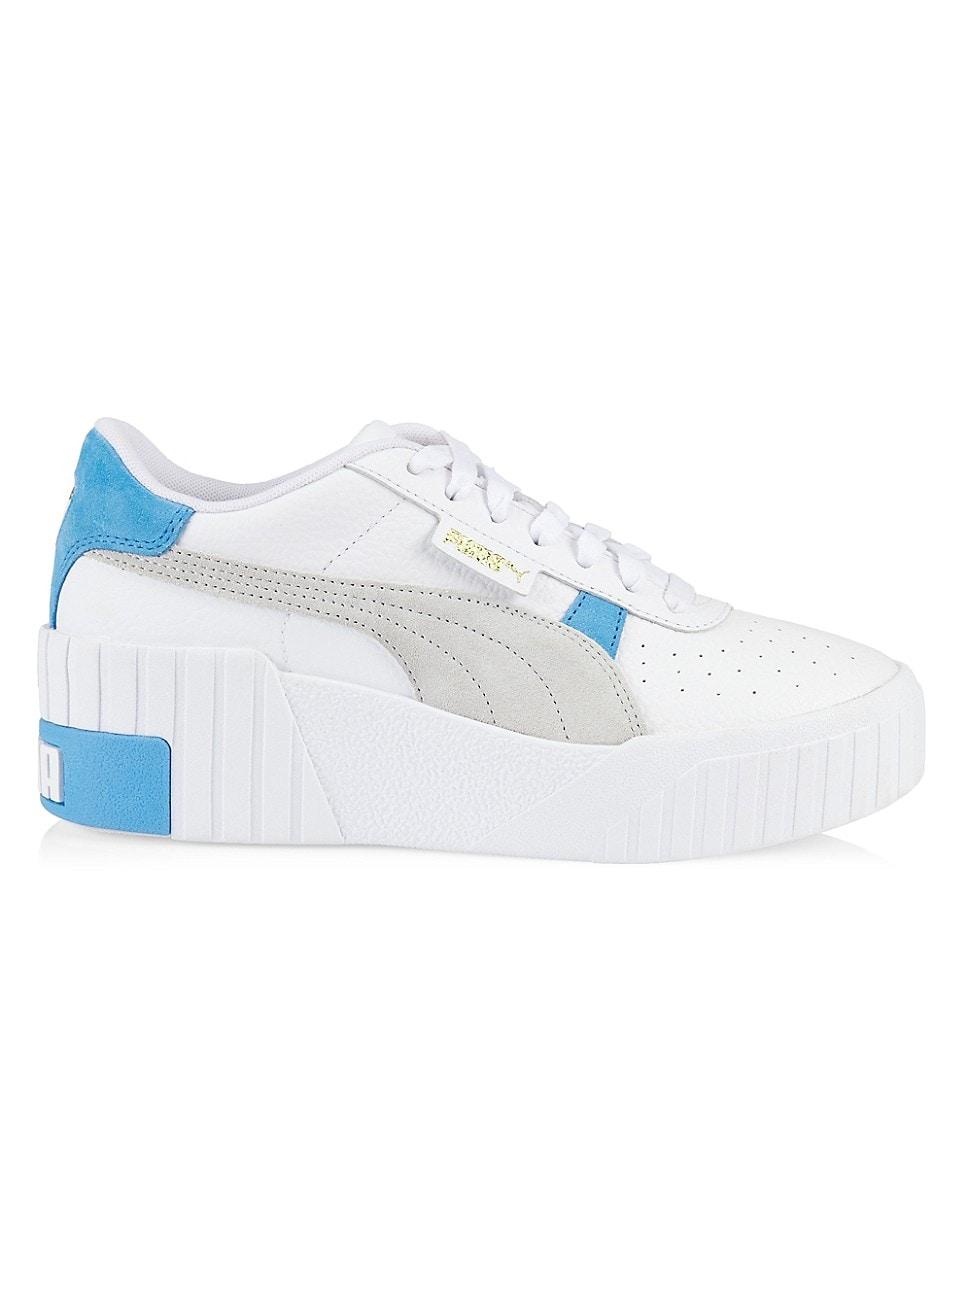 PUMA Cali Leather Wedge Sneakers in Blue | Lyst